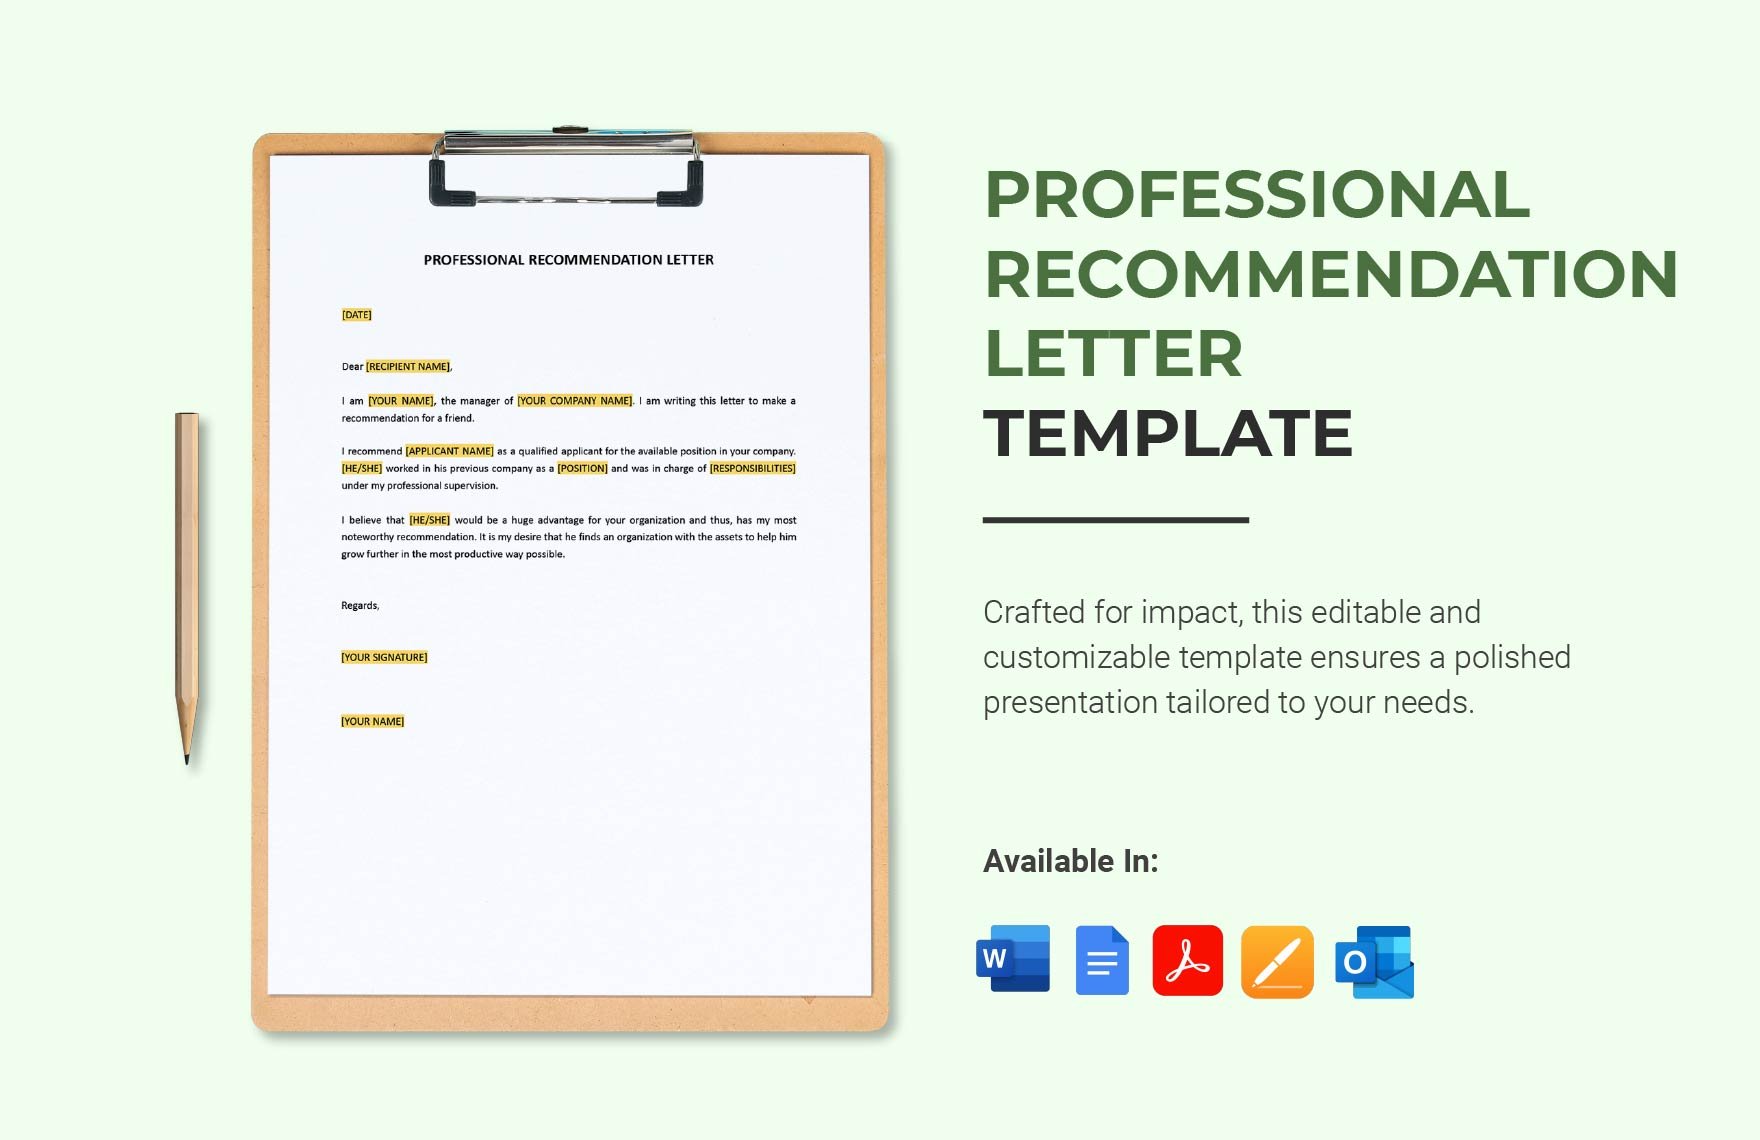 Professional Recommendation Letter Template in Word, Google Docs, PDF, Apple Pages, Outlook